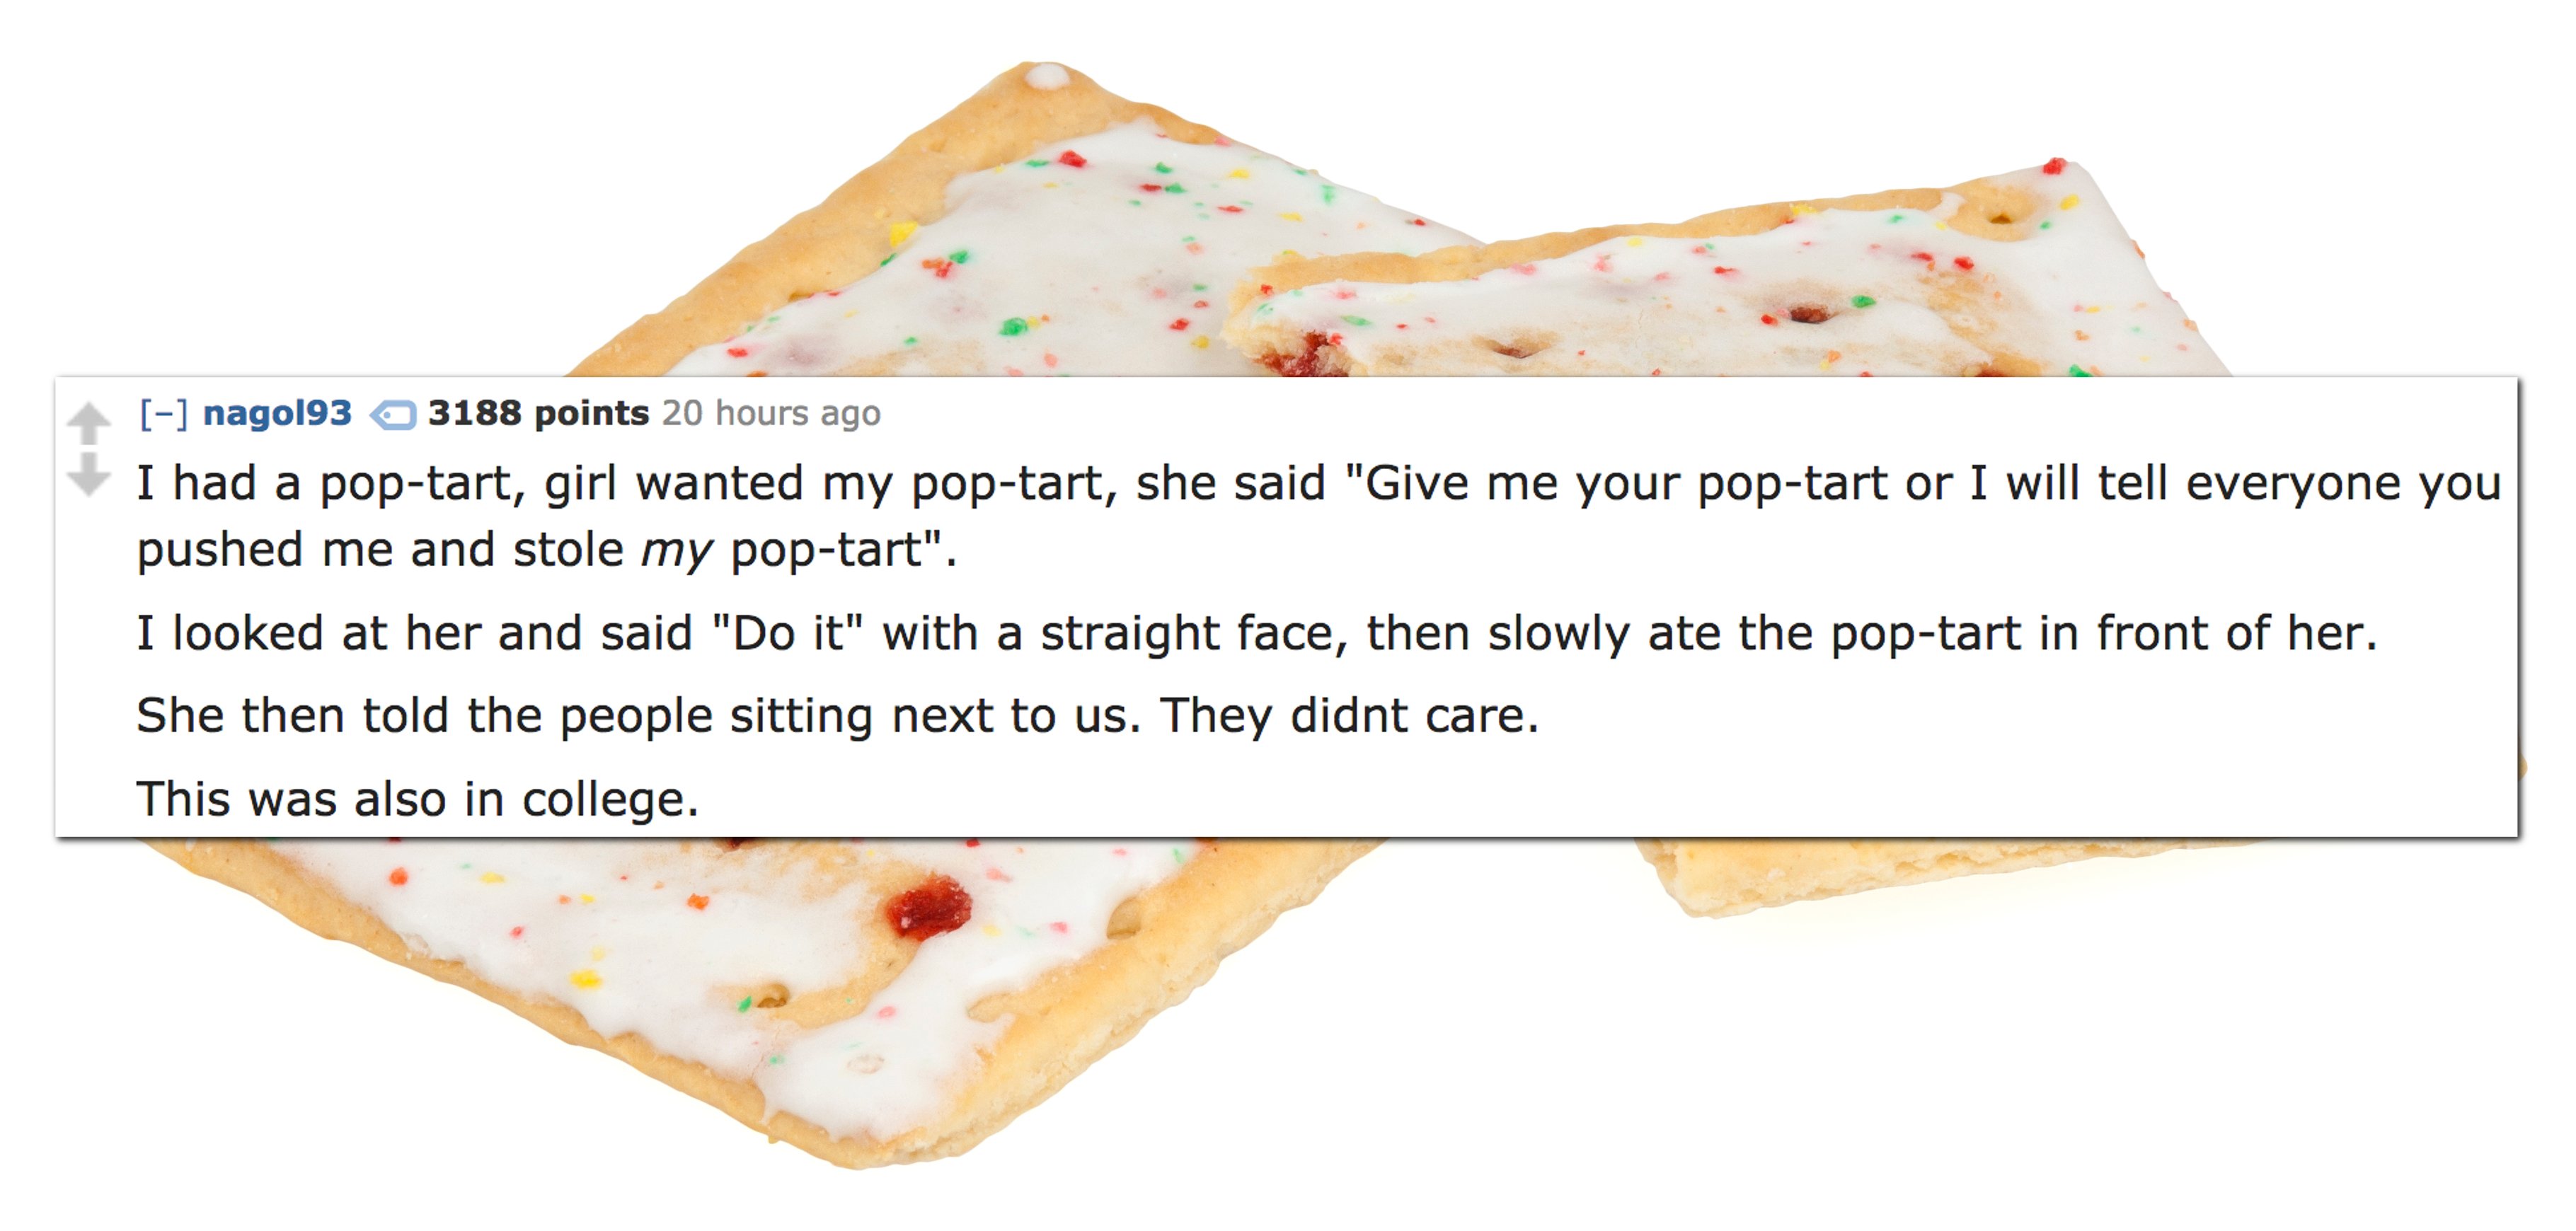 recipe - nago193 3188 points 20 hours ago I had a poptart, girl wanted my poptart, she said "Give me your poptart or I will tell everyone you pushed me and stole my poptart". I looked at her and said "Do it" with a straight face, then slowly ate the popta